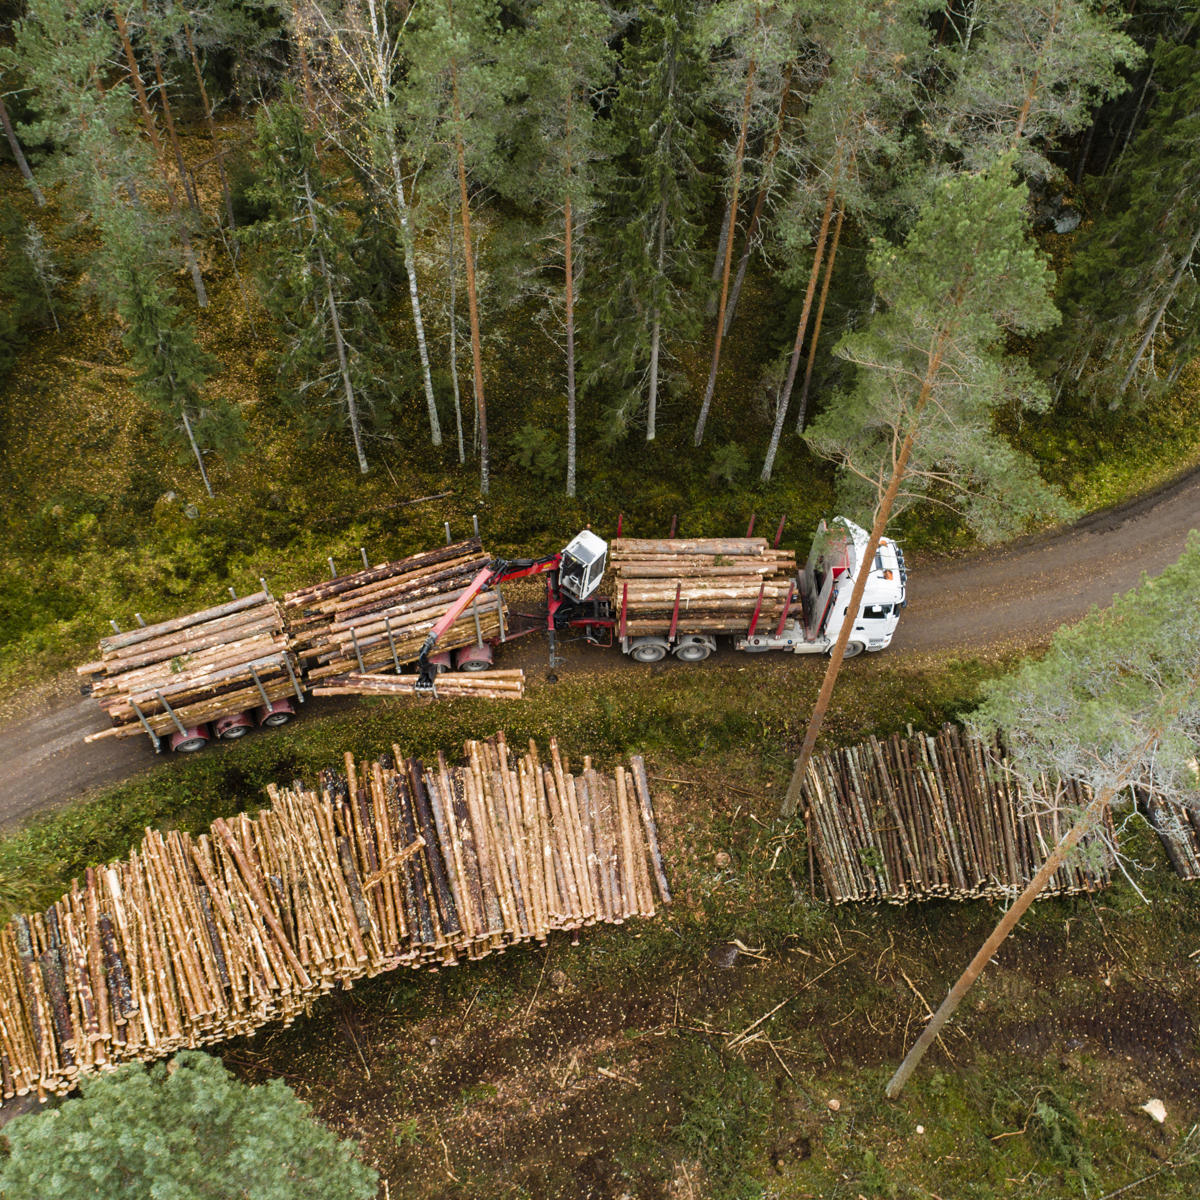 A timber lorry loading logs on a forest road.